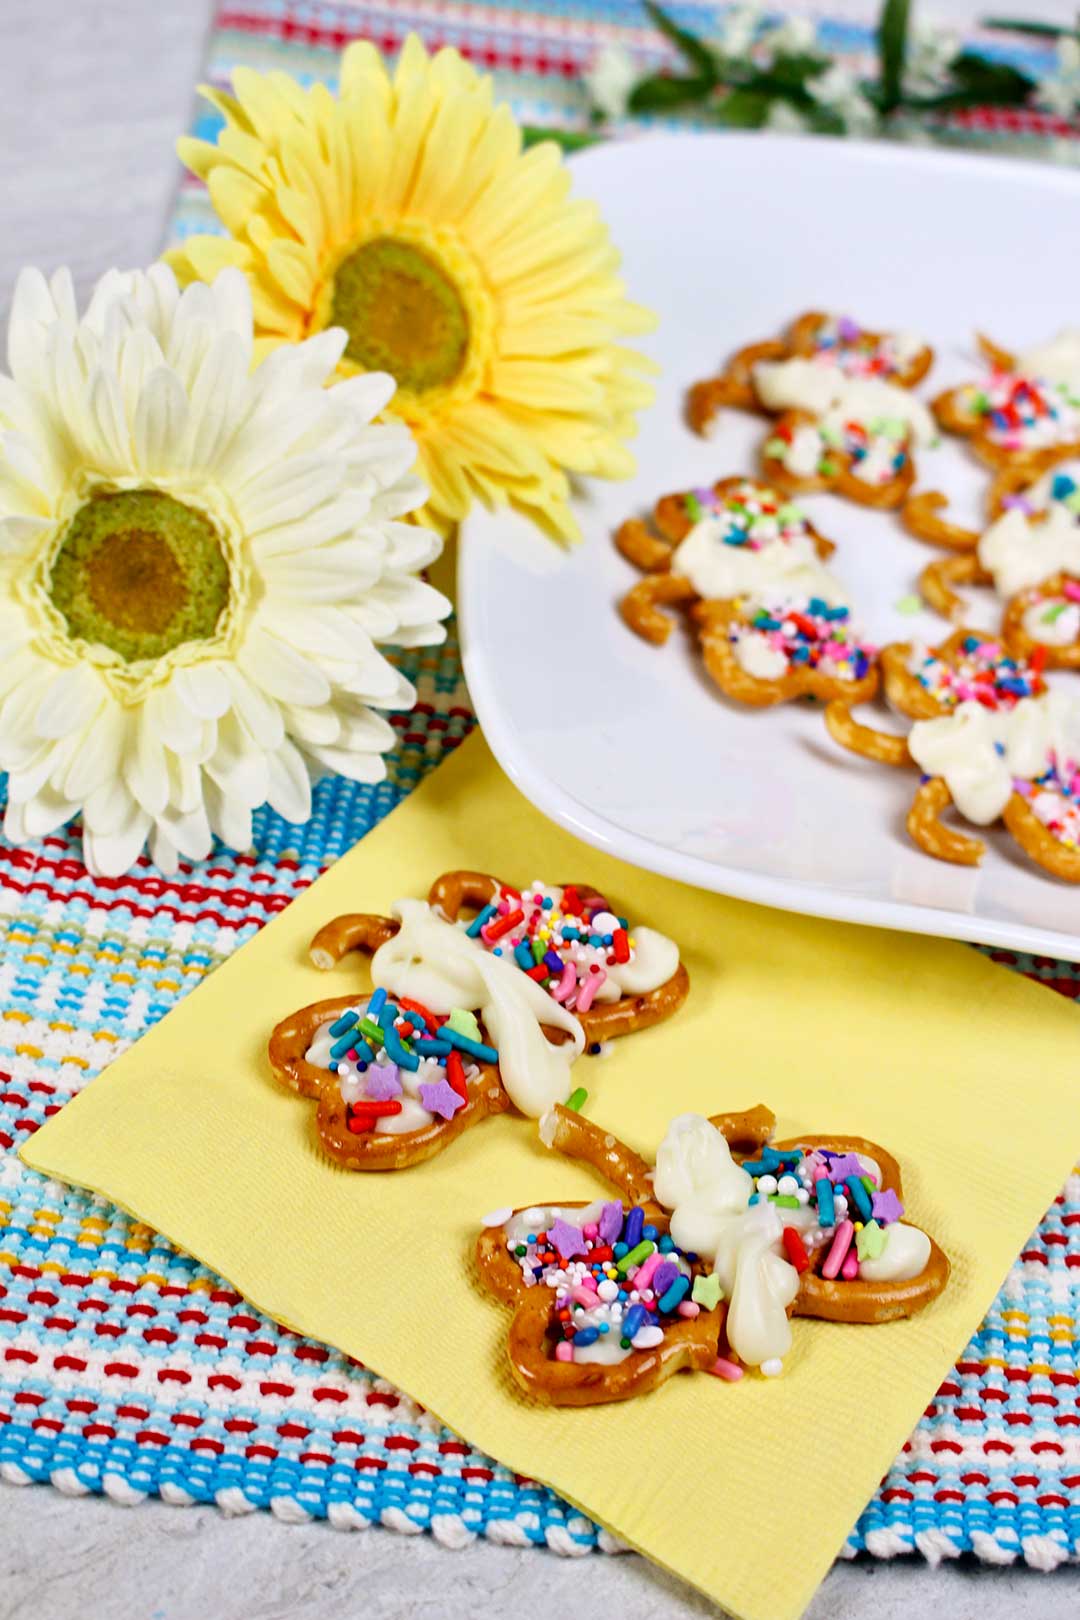 Colorful butterfly pretzel cookies decorated with sprinkles sitting next to daisies.